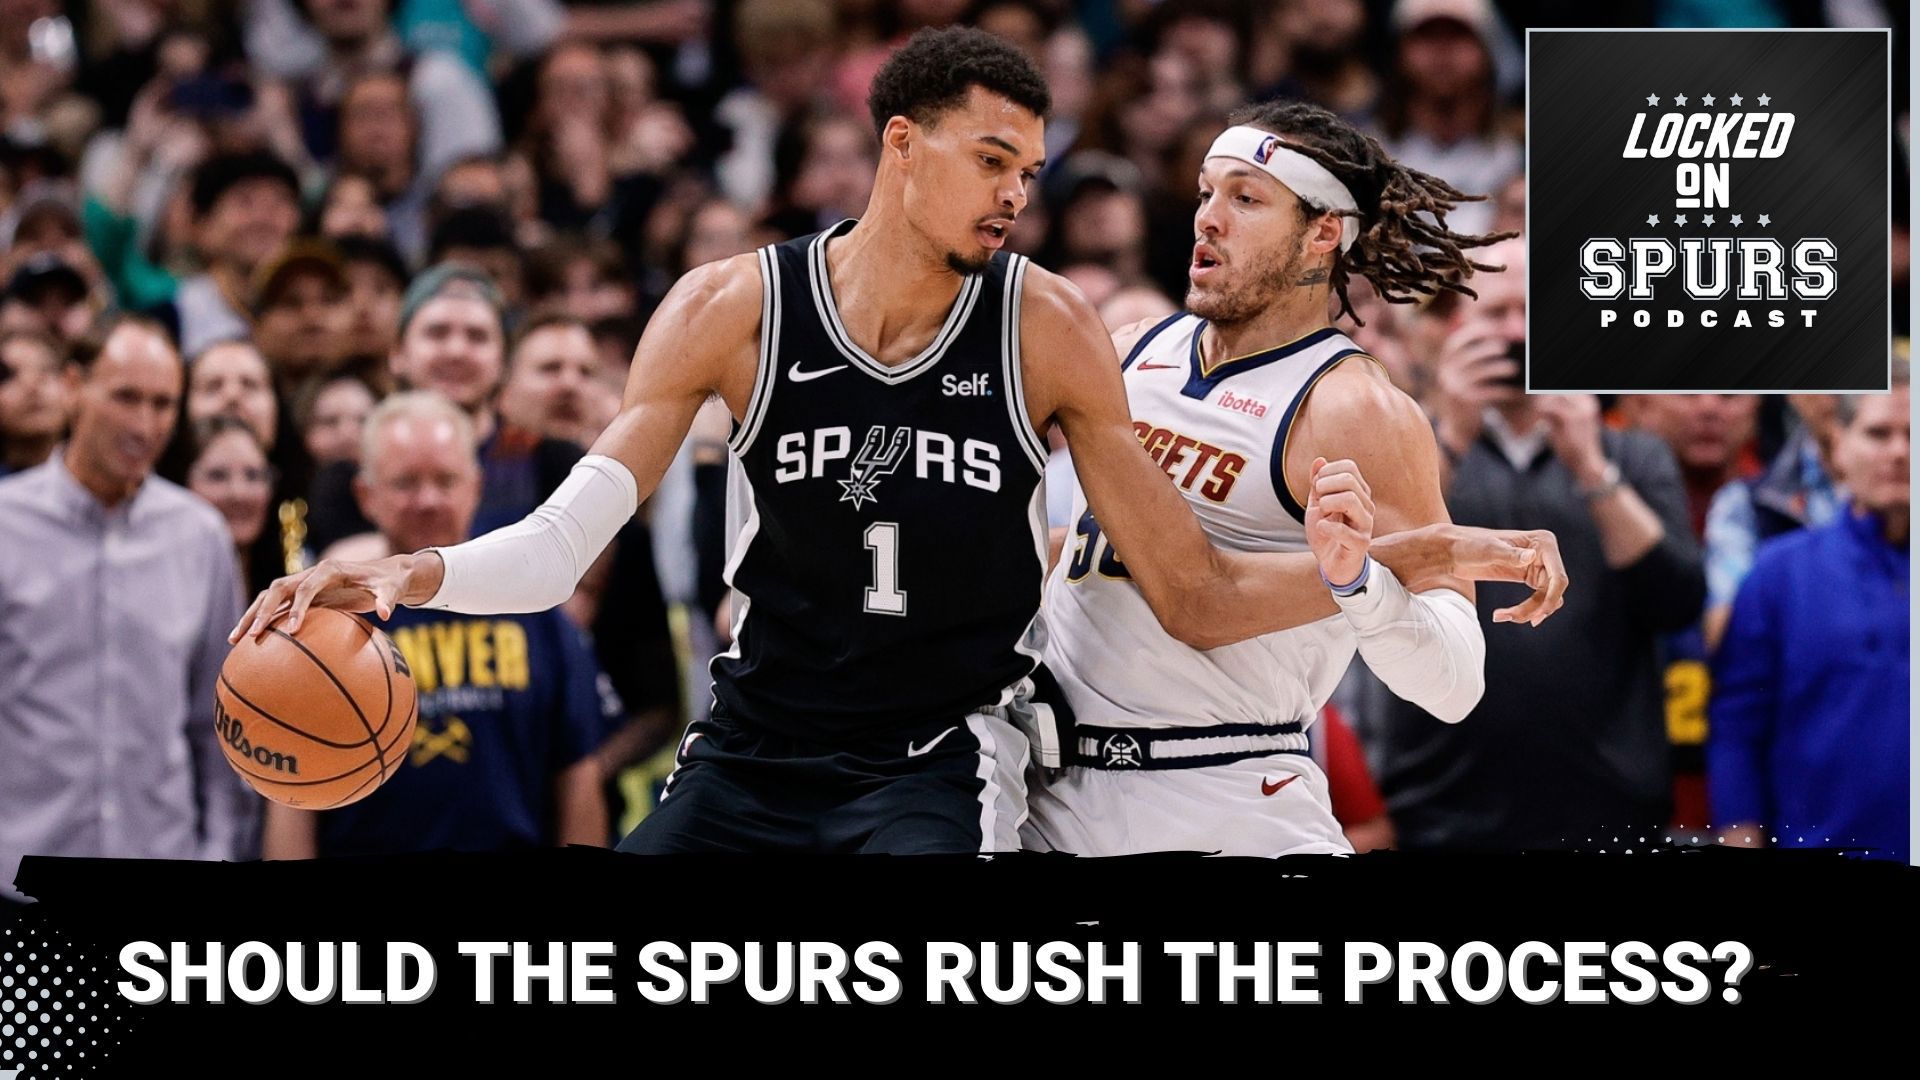 The Spurs have plenty of assets to get out of the rebuild sooner rather than later.